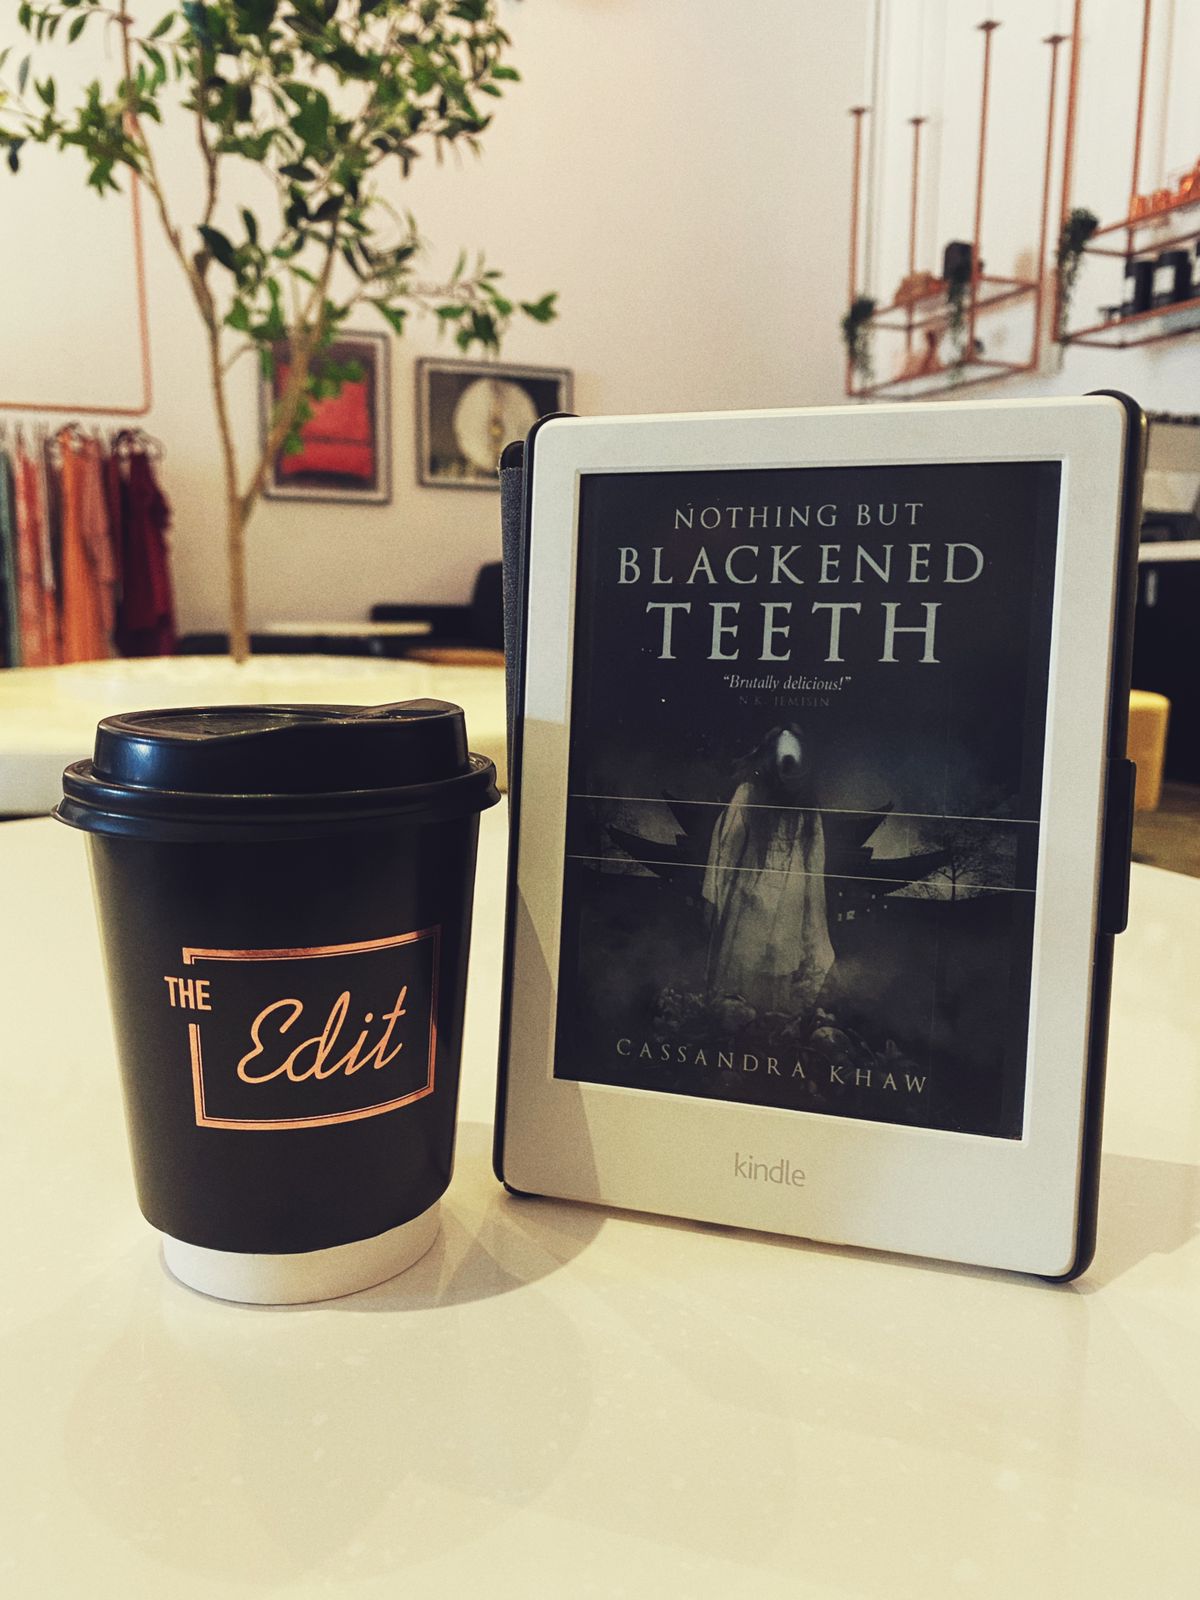 Nothing but blackened teeth by Cassandra Khaw - A book review